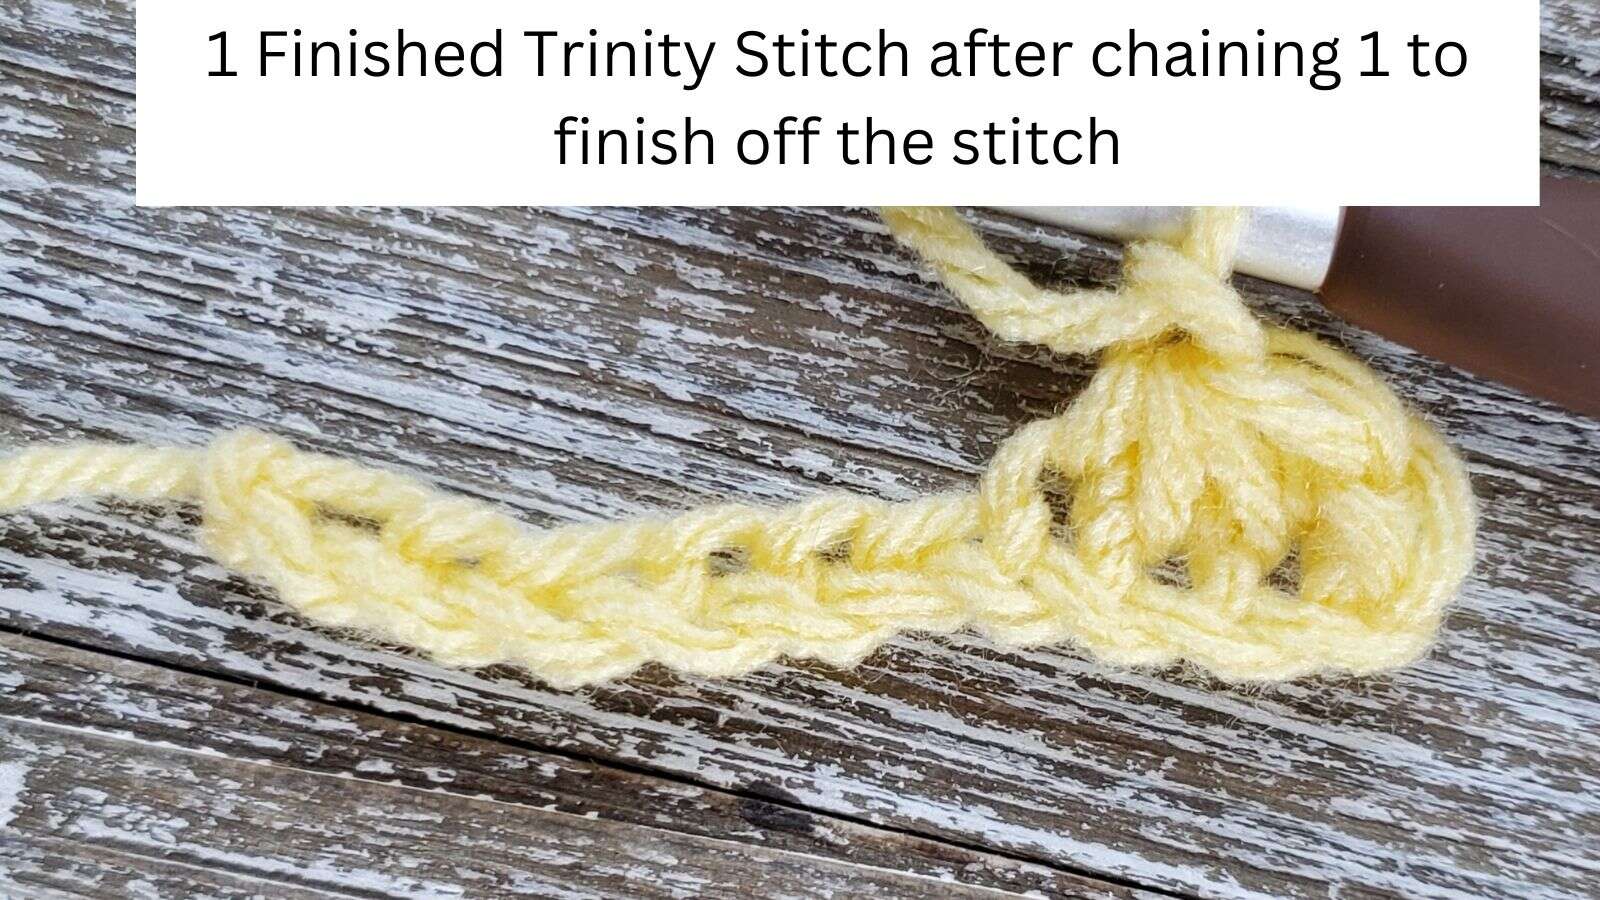 A Finished Trinity Stitch after chaining 1 to finish off the stitch